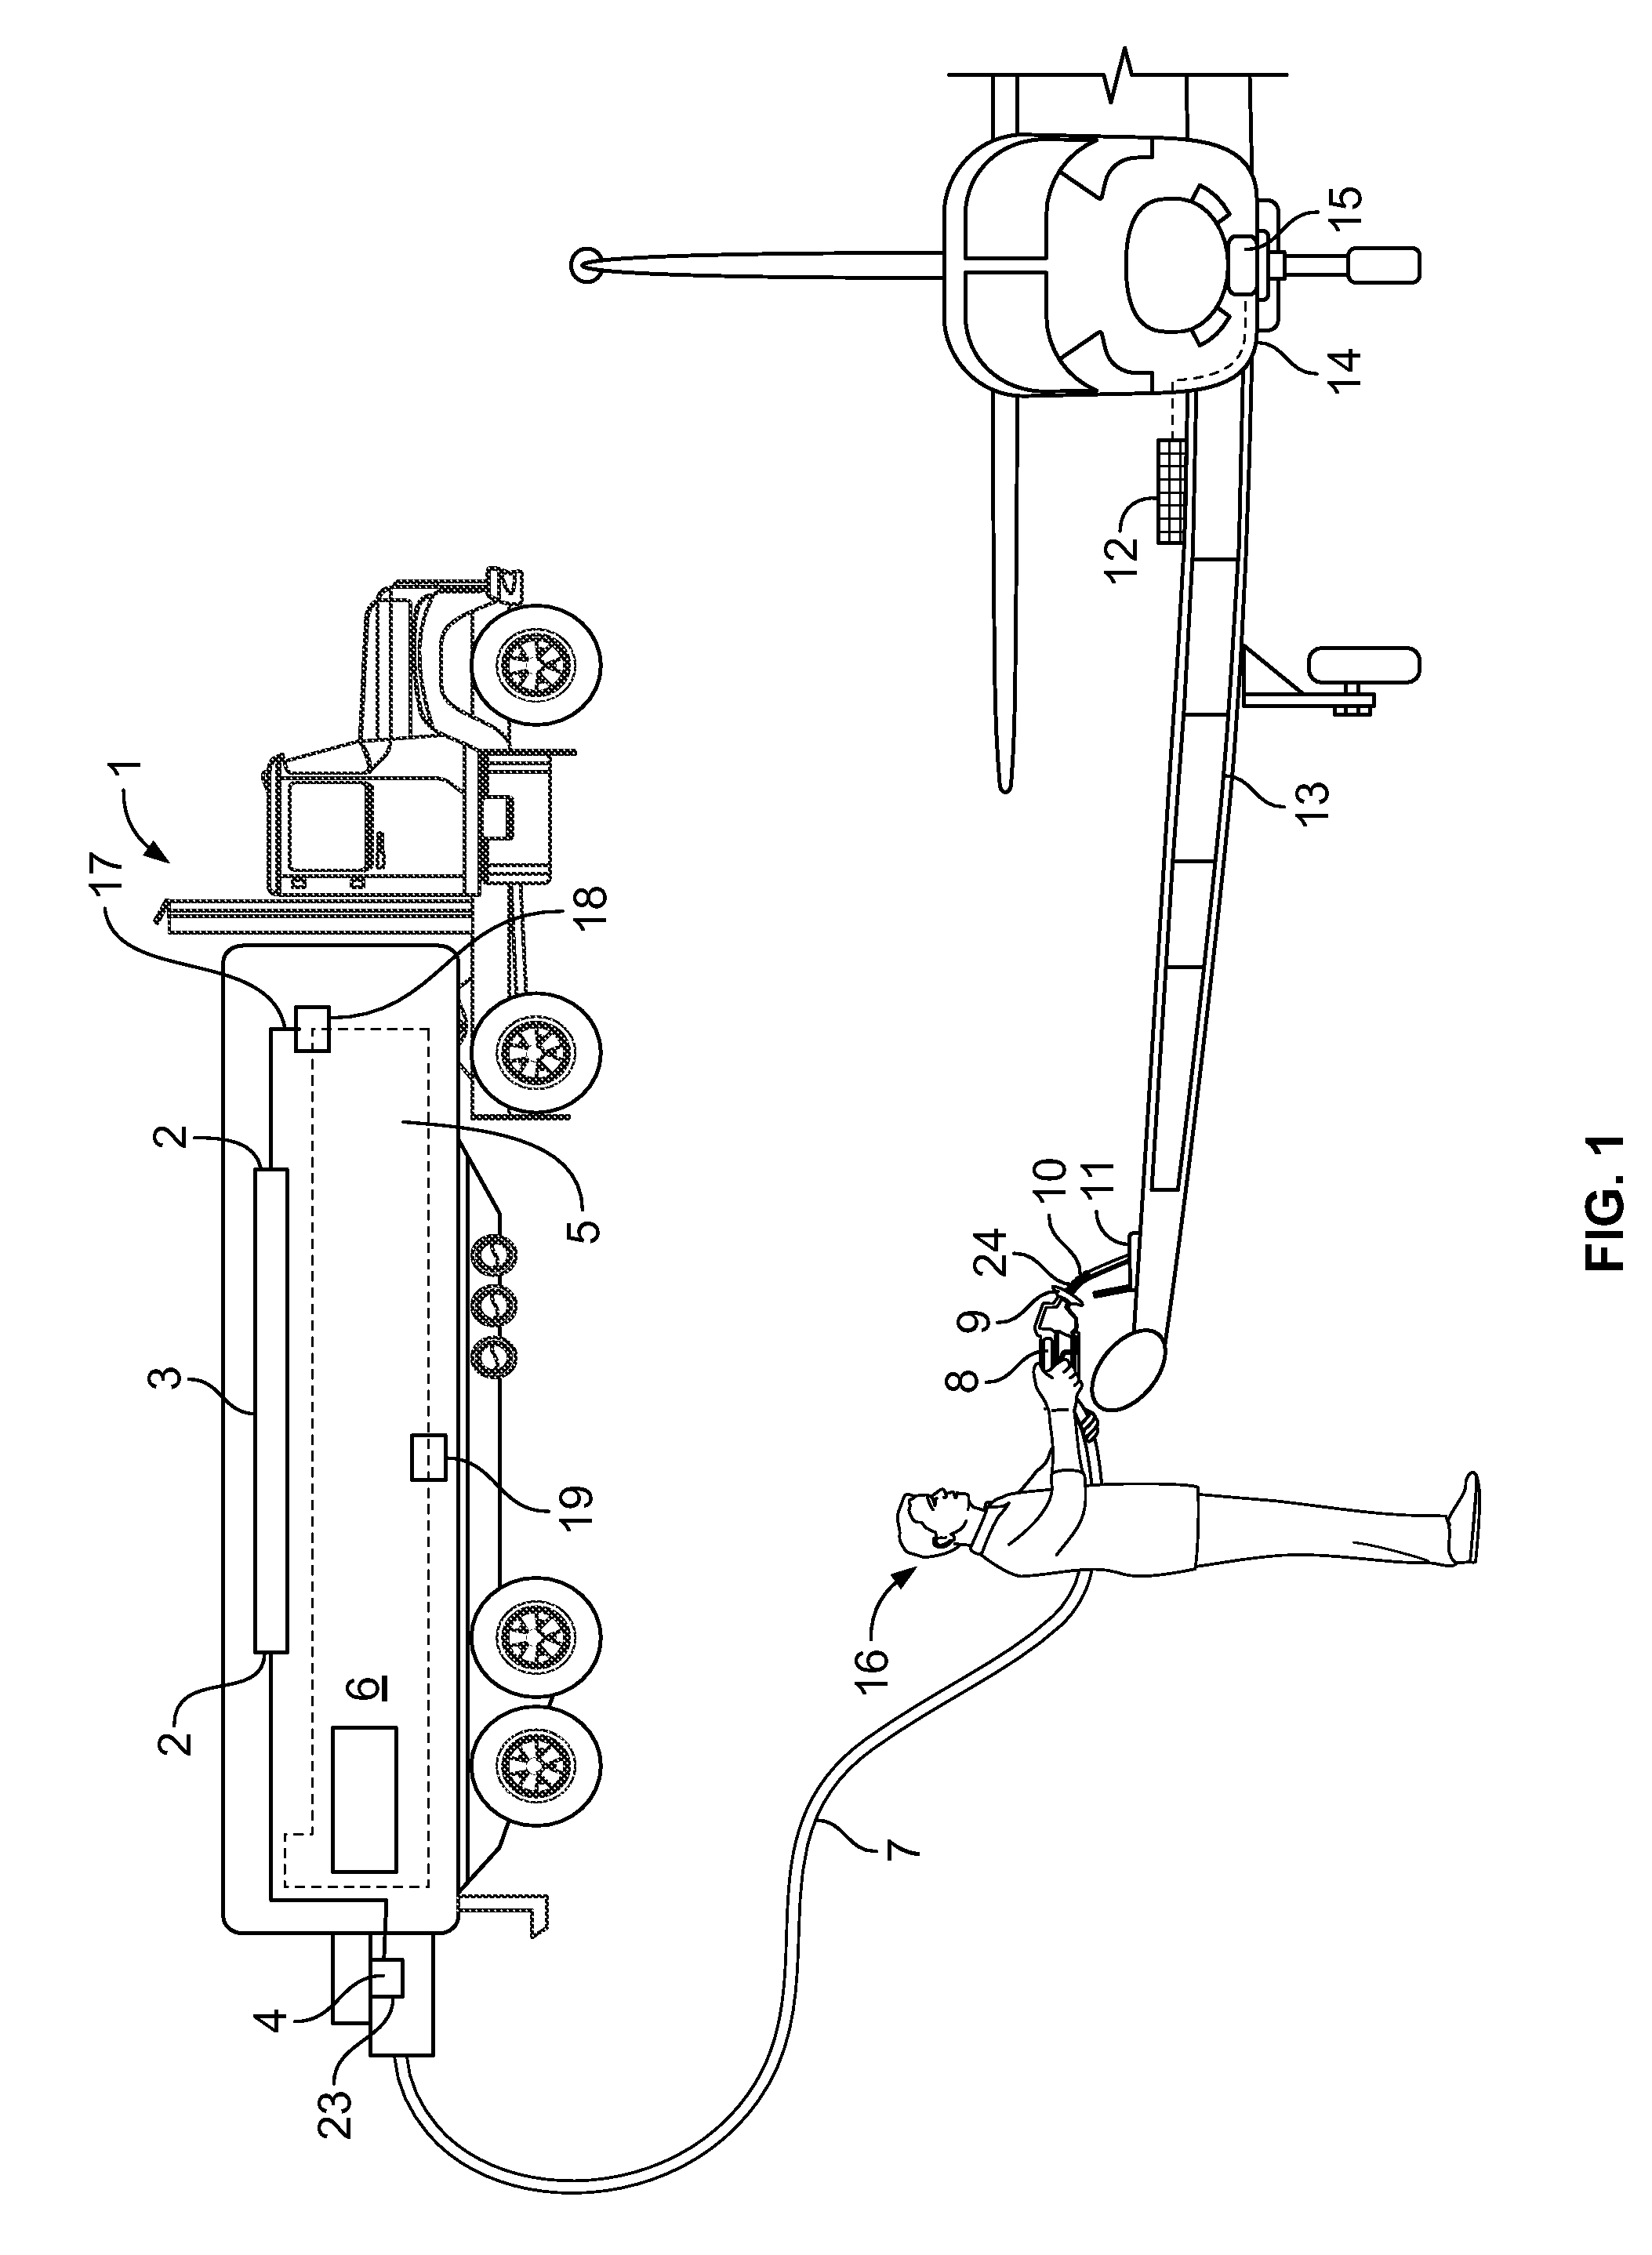 Method and System for Preventing Misfueling